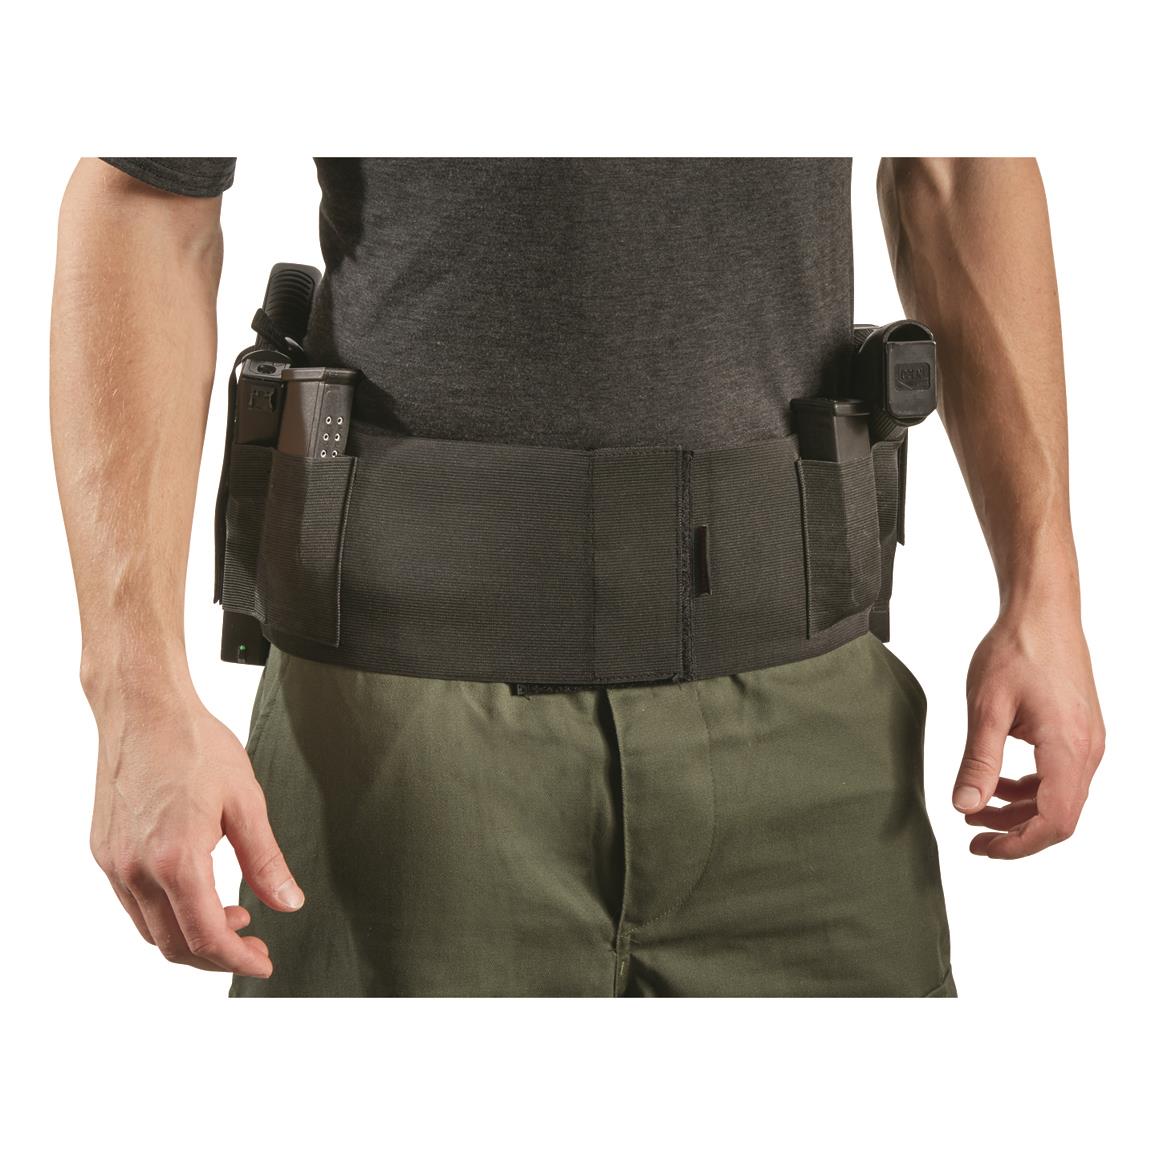 Belly Band Gun Pistol Concealed Weapon Duty Holster SWEAT BLOCKER LARGE USA